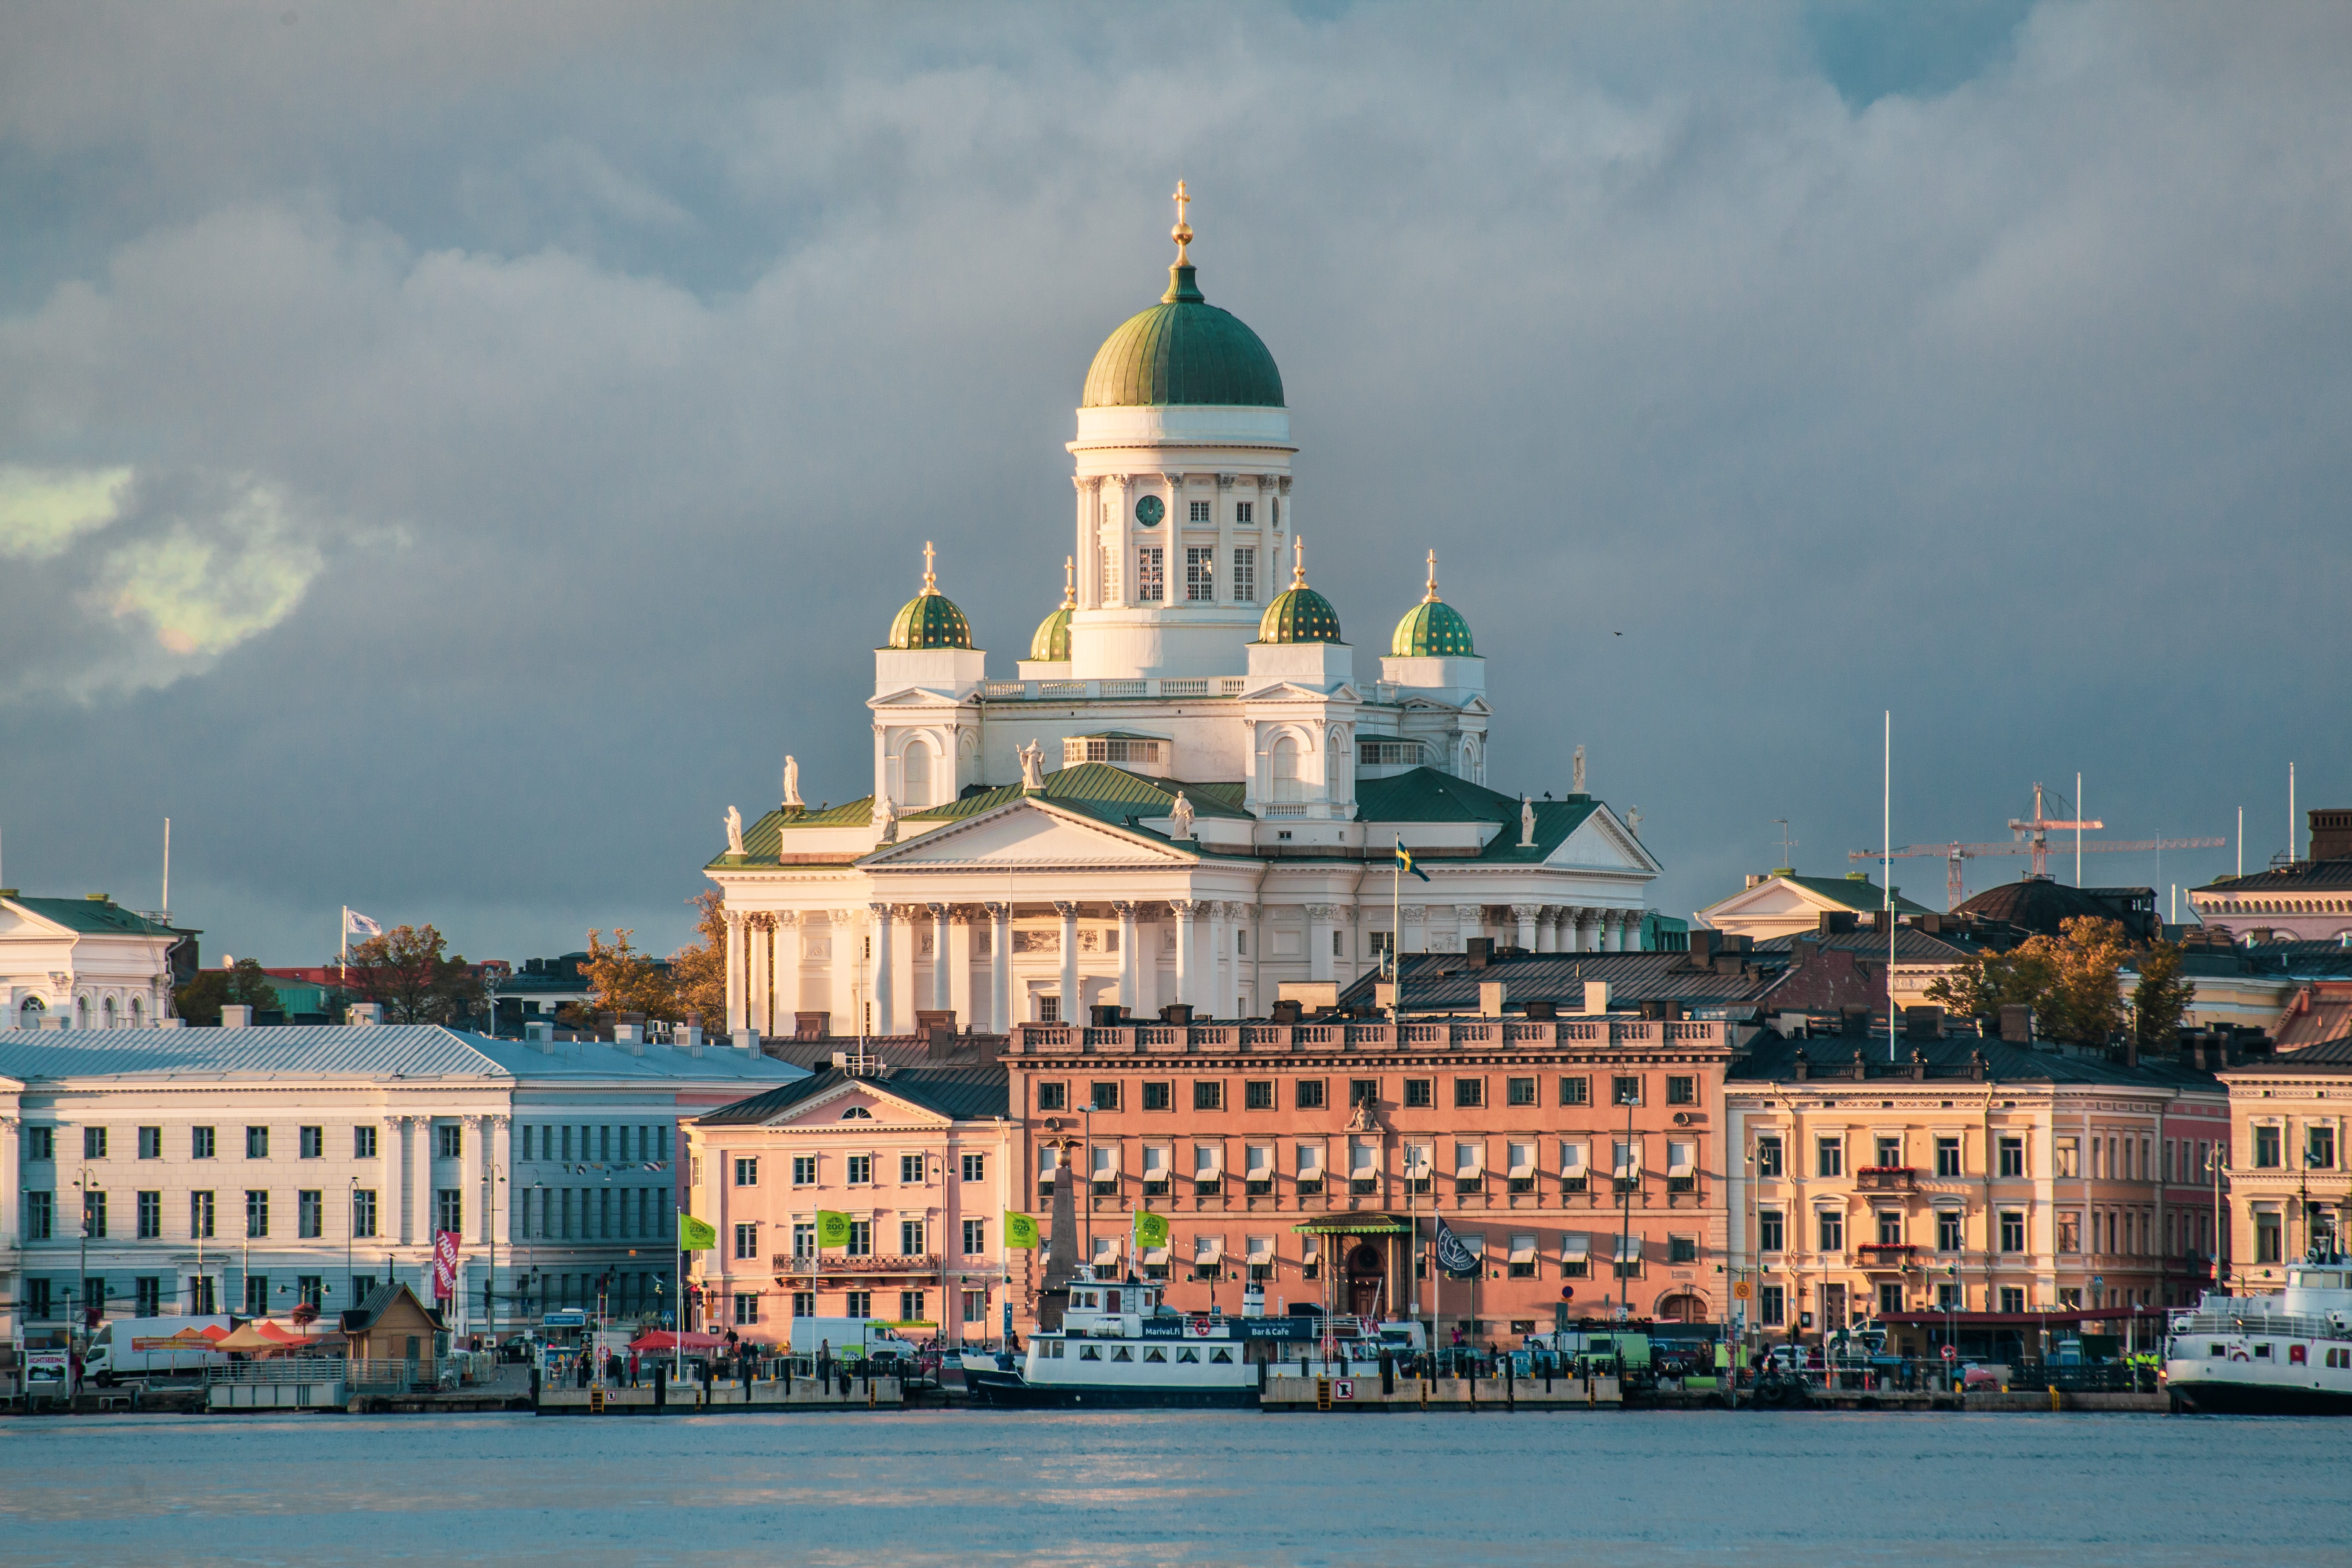 City image of Finland